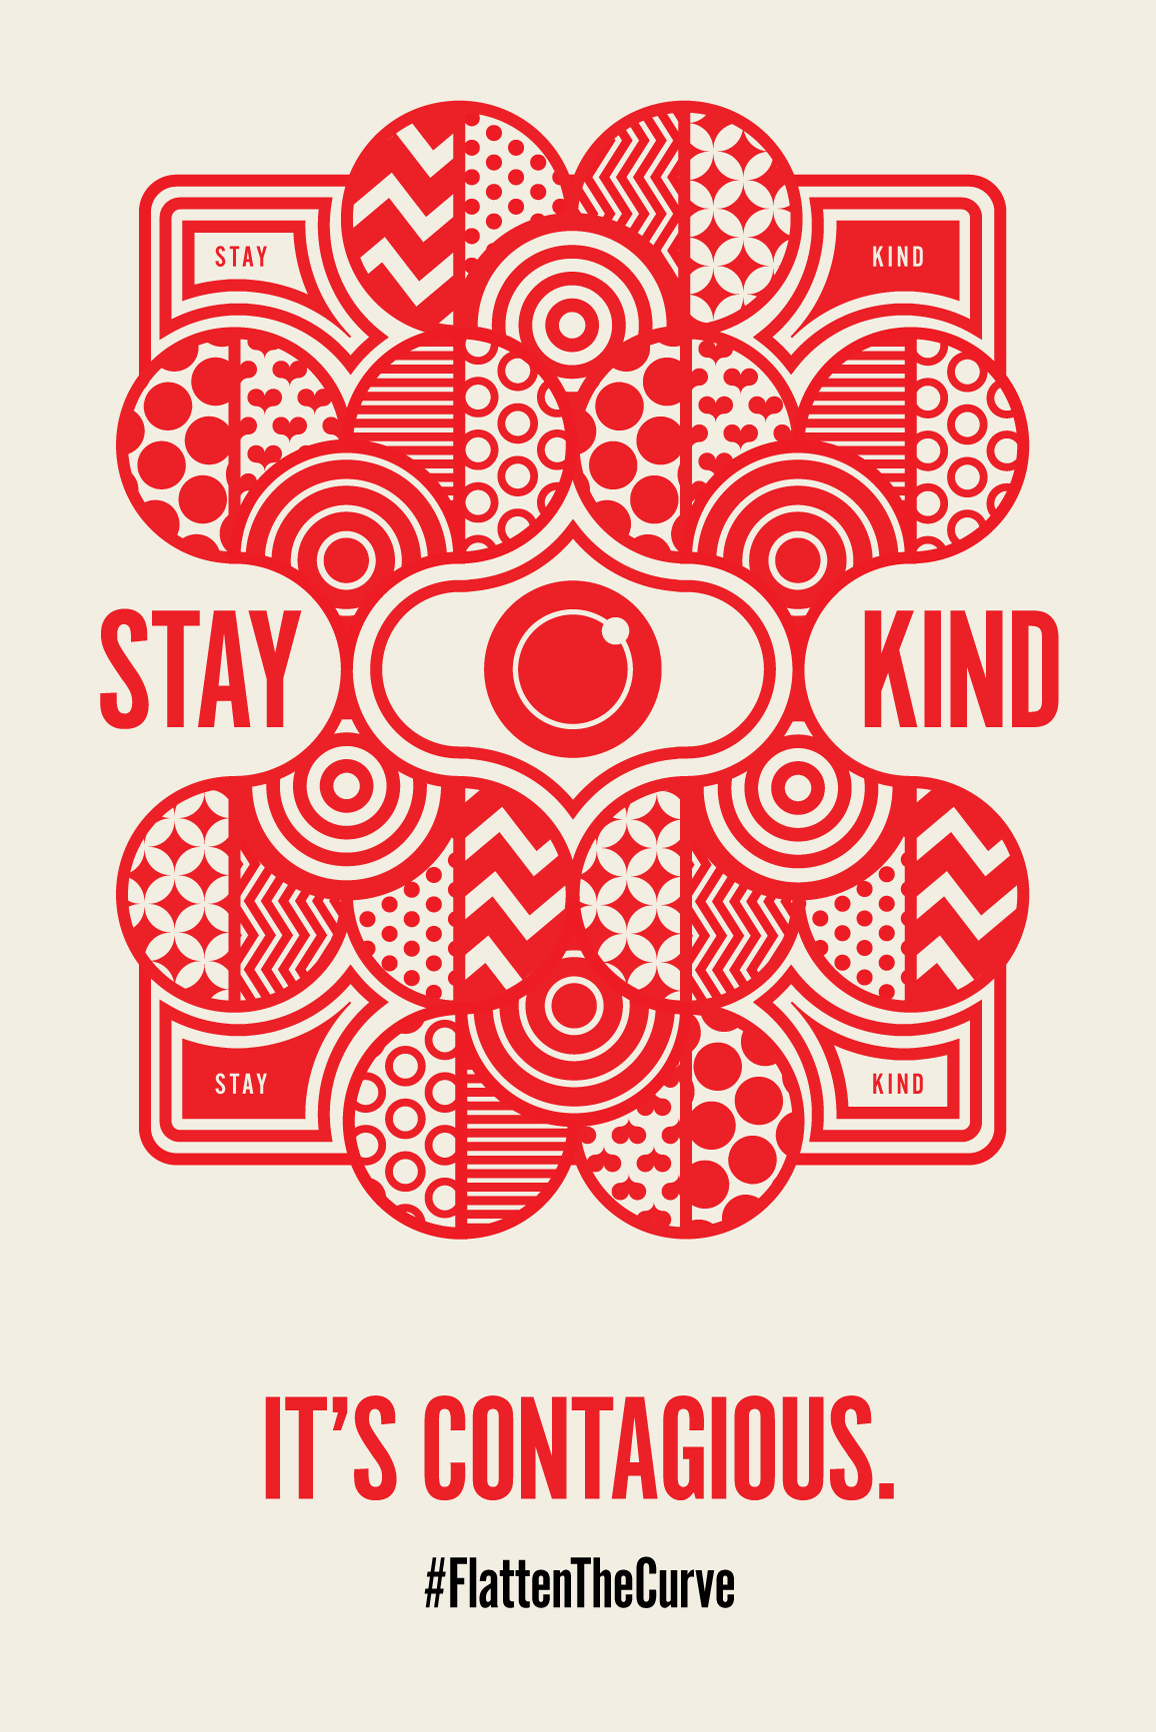 Kindness Is Contagious